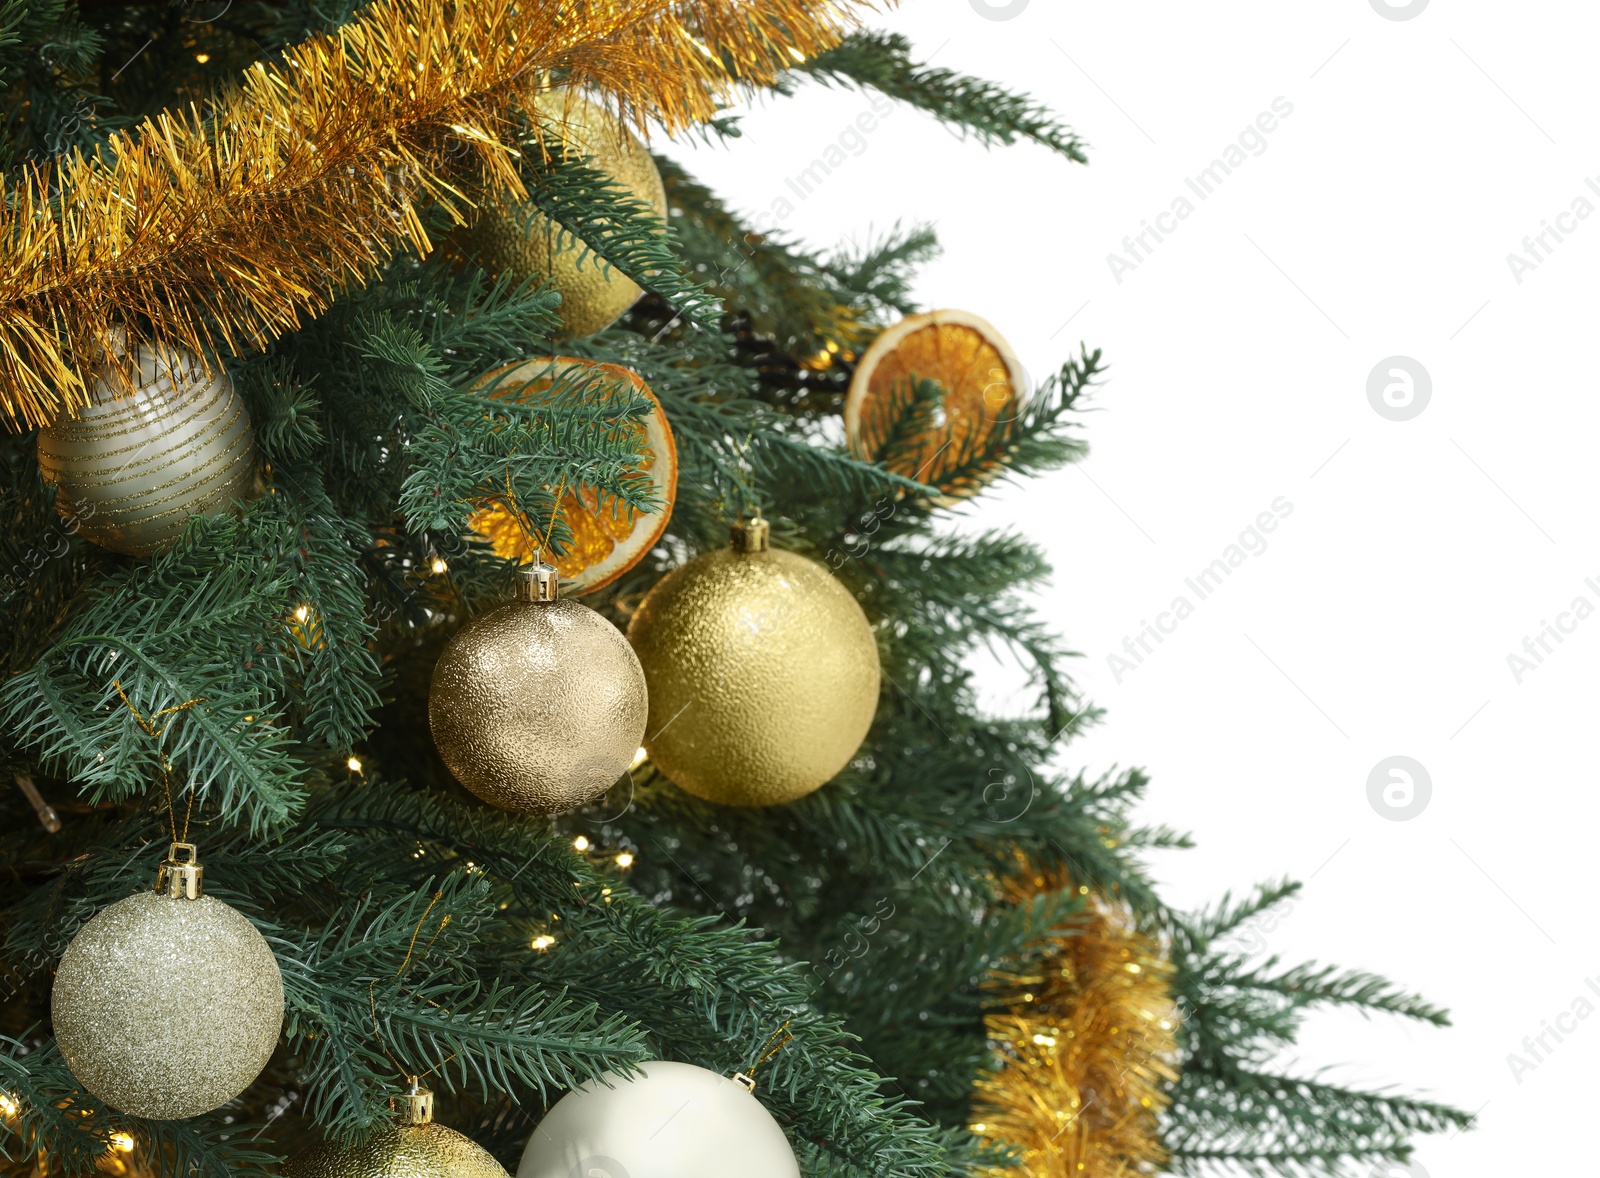 Photo of Beautiful Christmas tree decorated with ornaments isolated on white